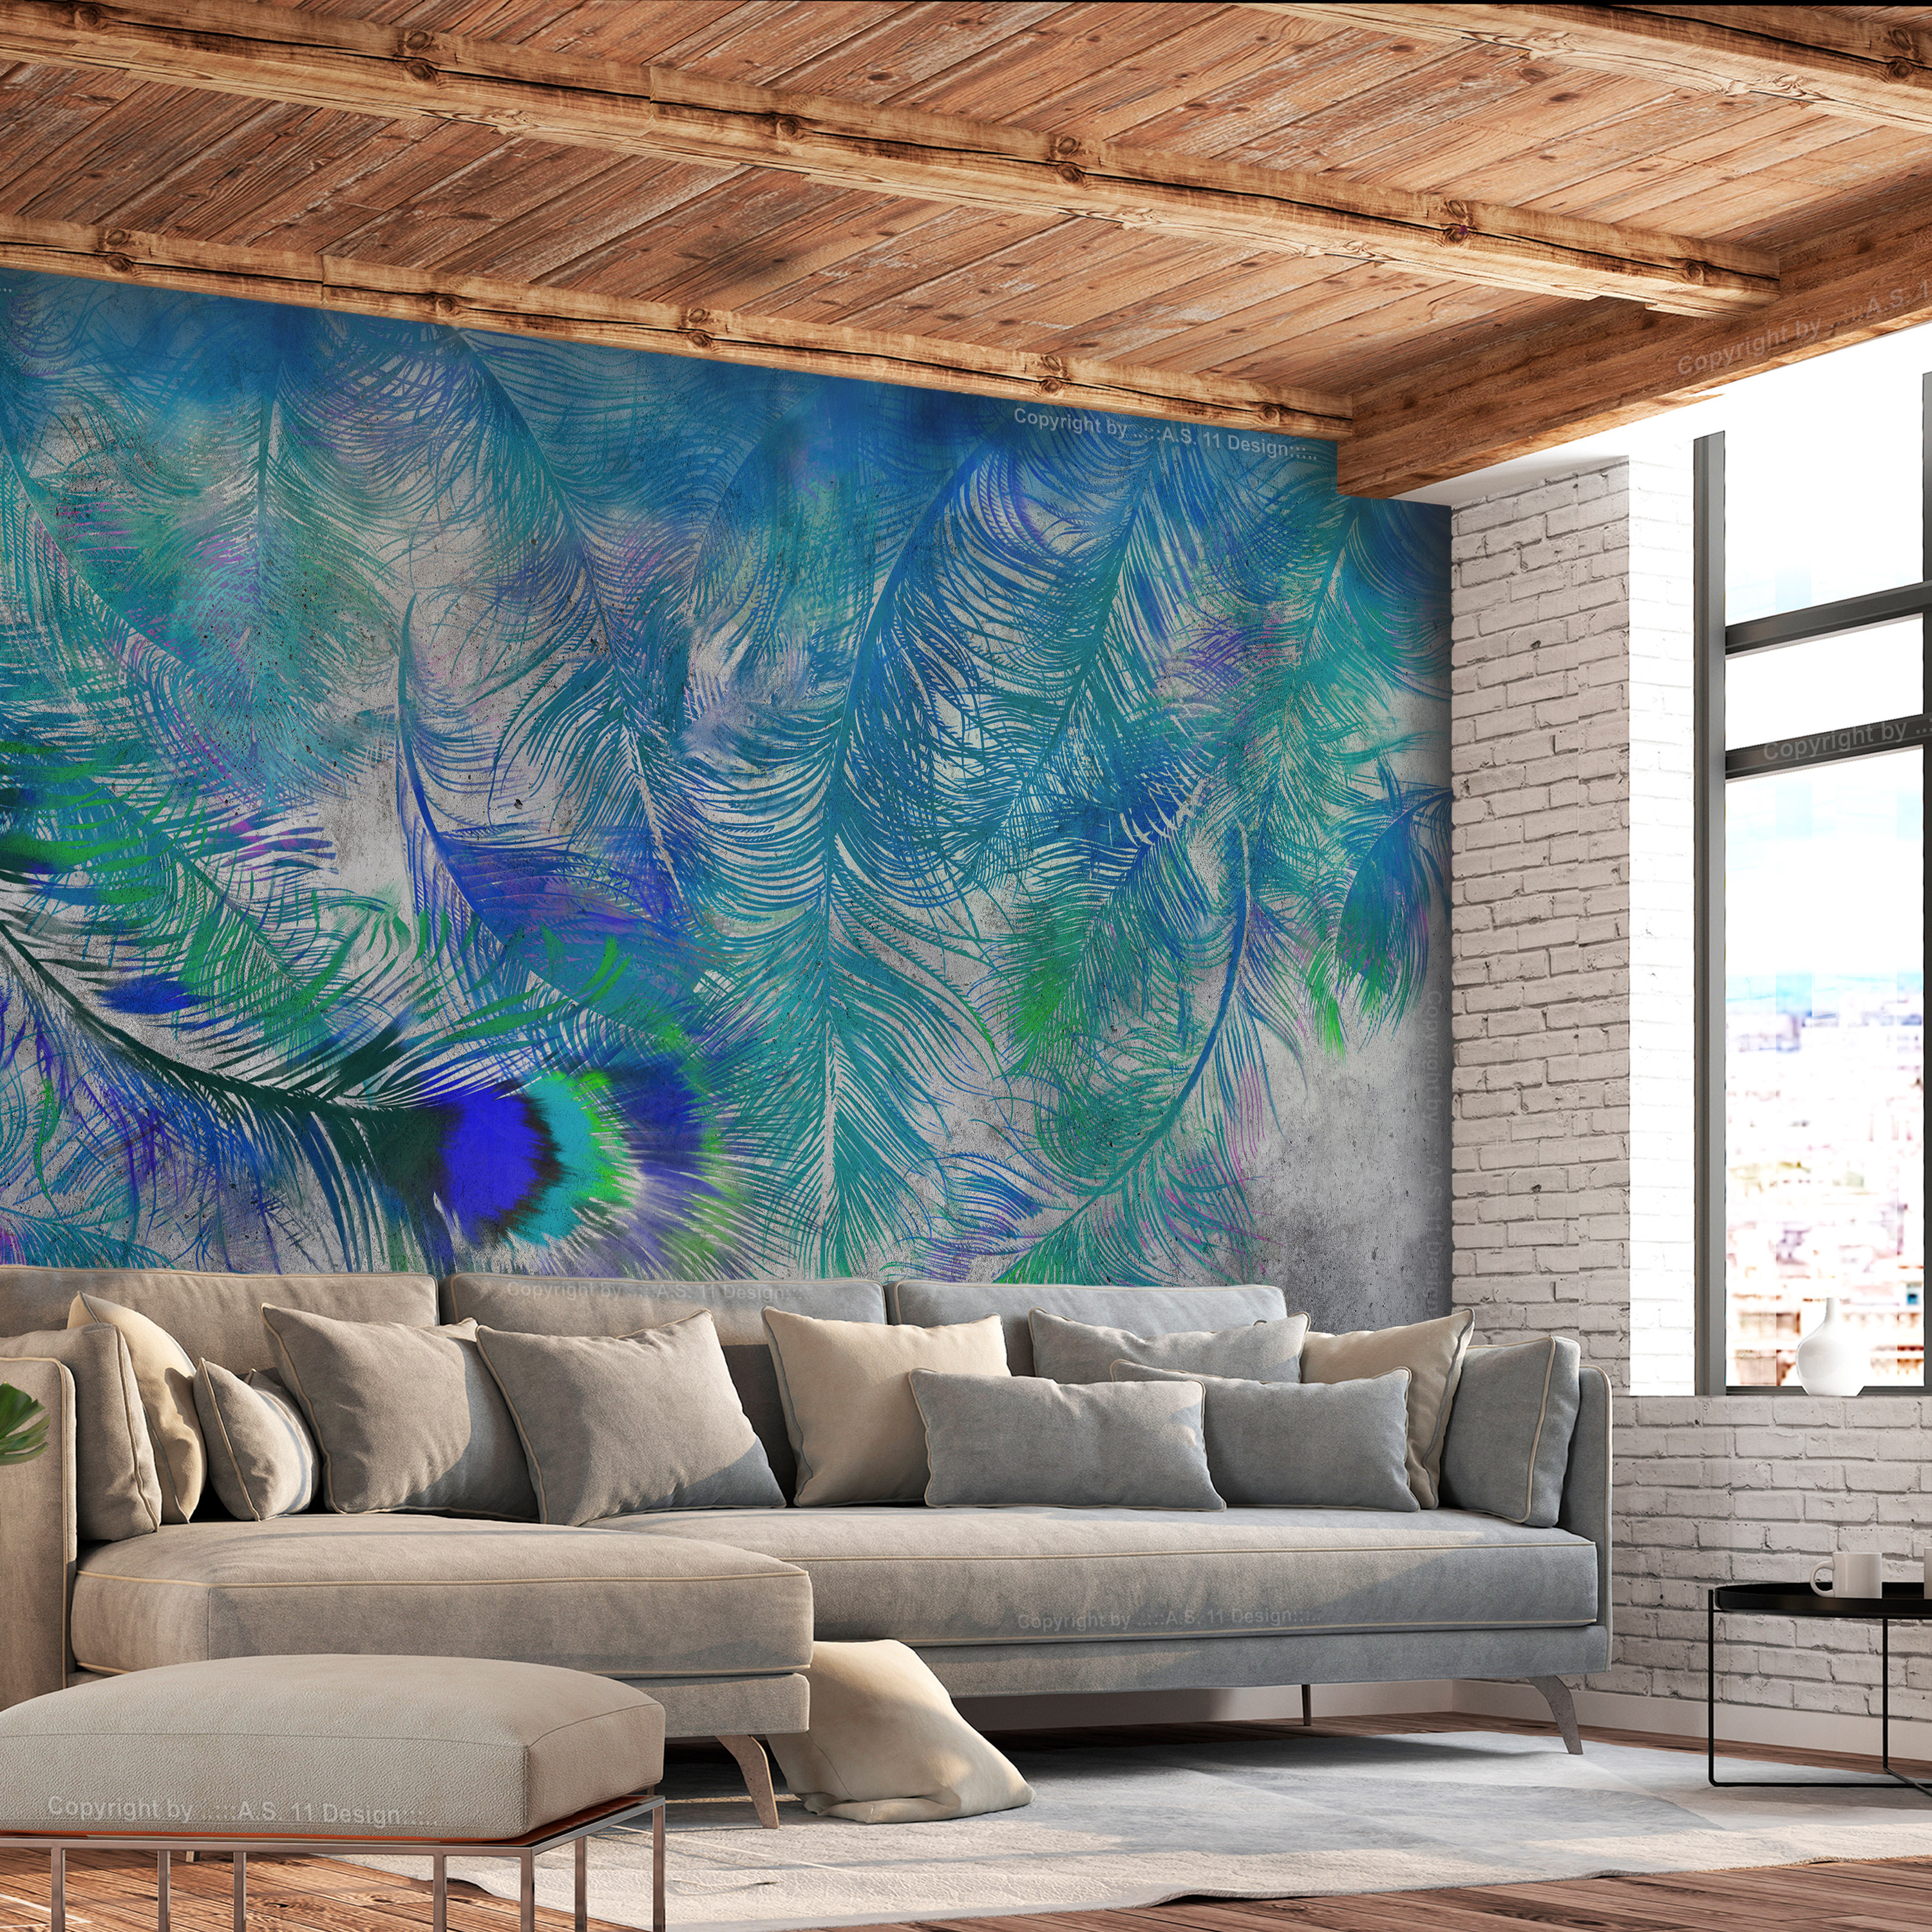 Self-adhesive Wallpaper - Peacock Feathers - 441x315